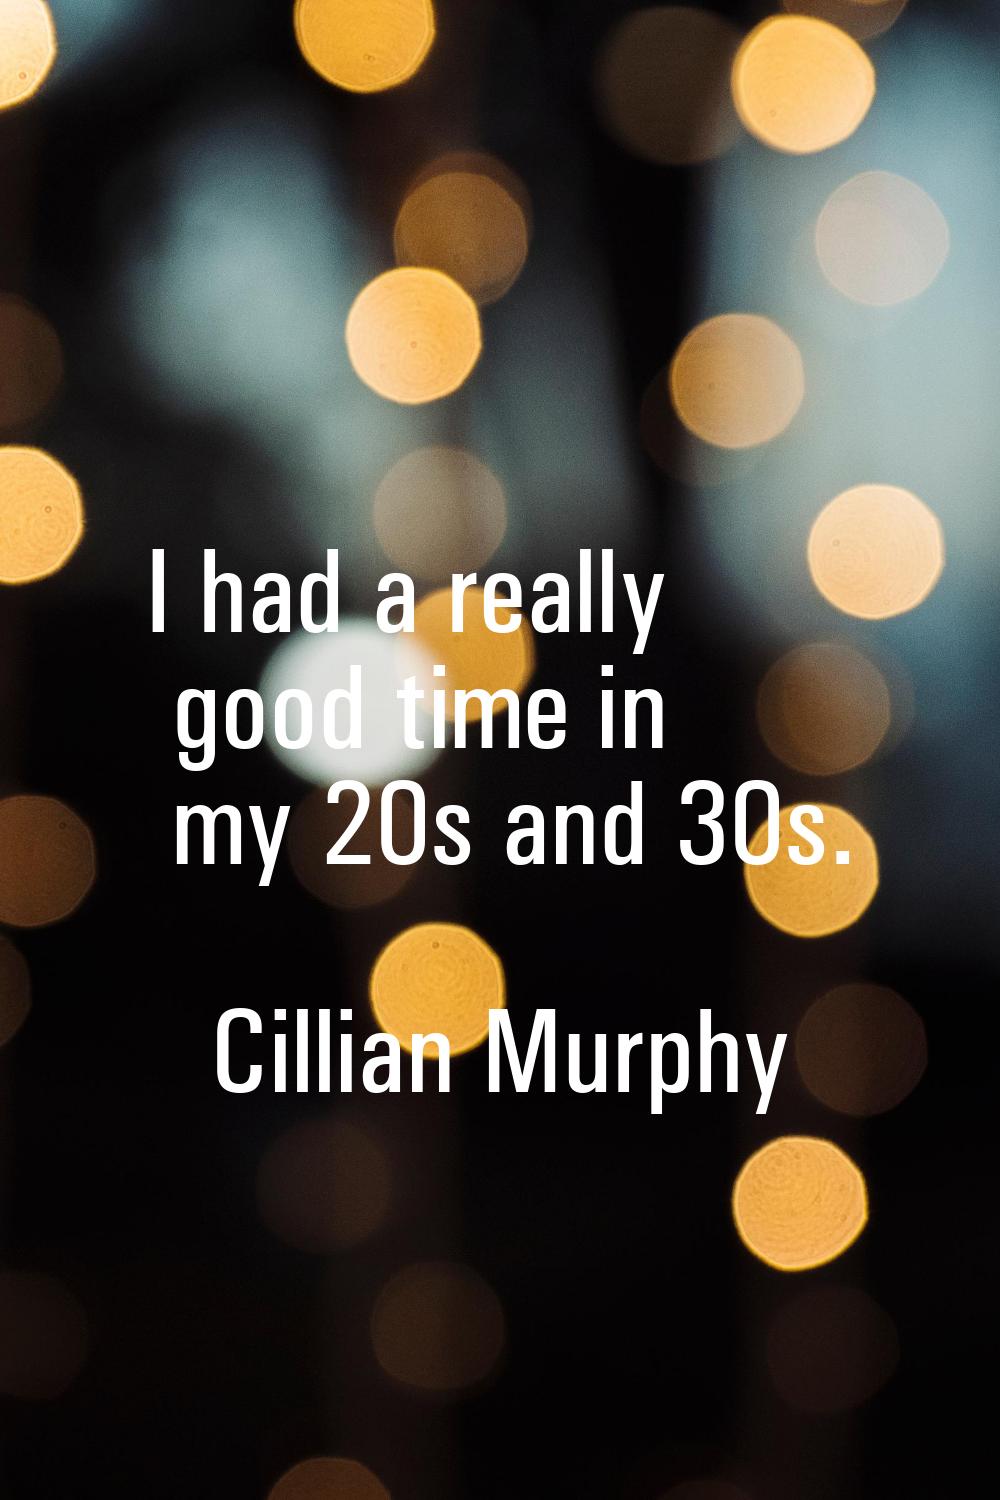 I had a really good time in my 20s and 30s.